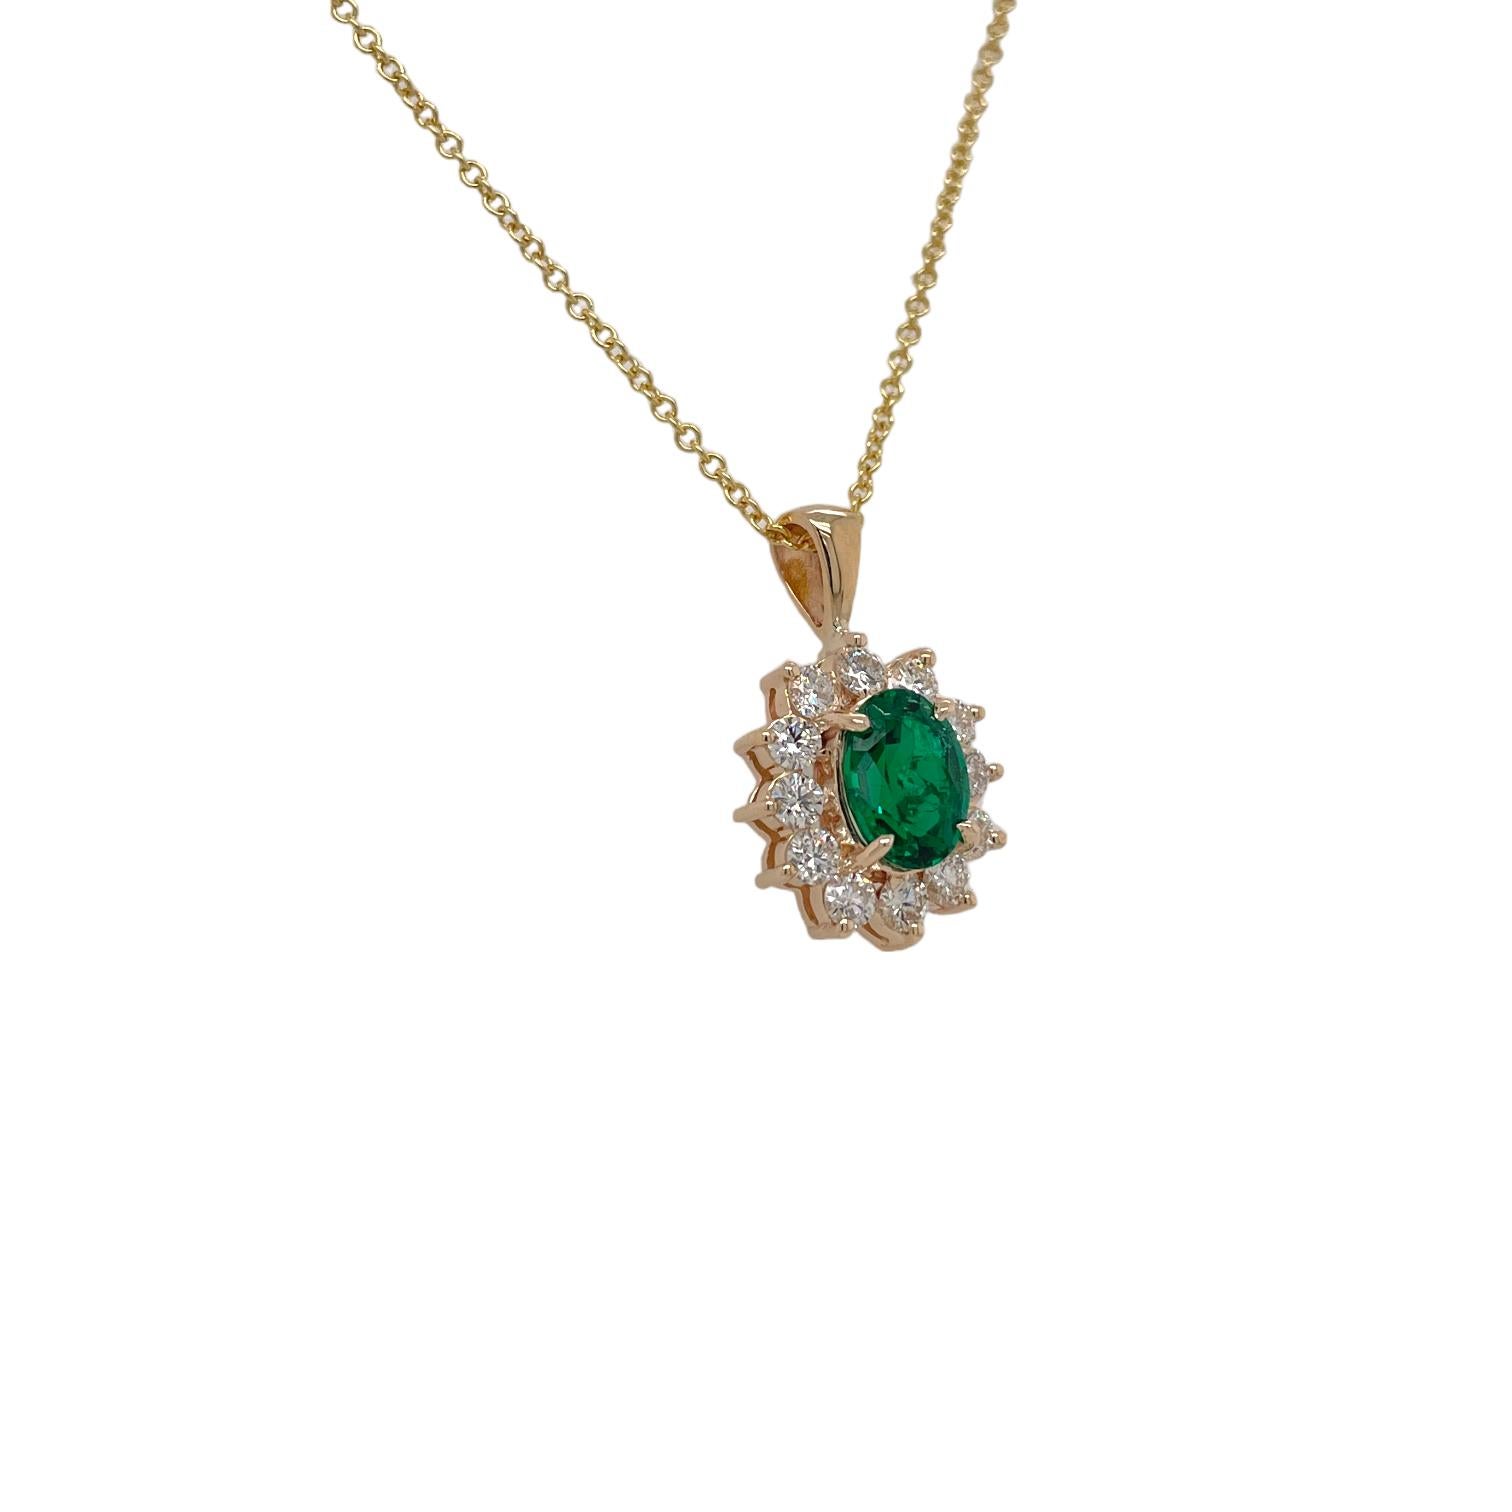 Pendant features 1 center oval brilliant shape emerald weighing 1.27ct. Oval emerald is surrounded by 12 round brilliant diamonds, Princess Diana style halo, weighing 0.65tcw. Emerald originates from Zambia. Diamonds are near colorless and SI1 in